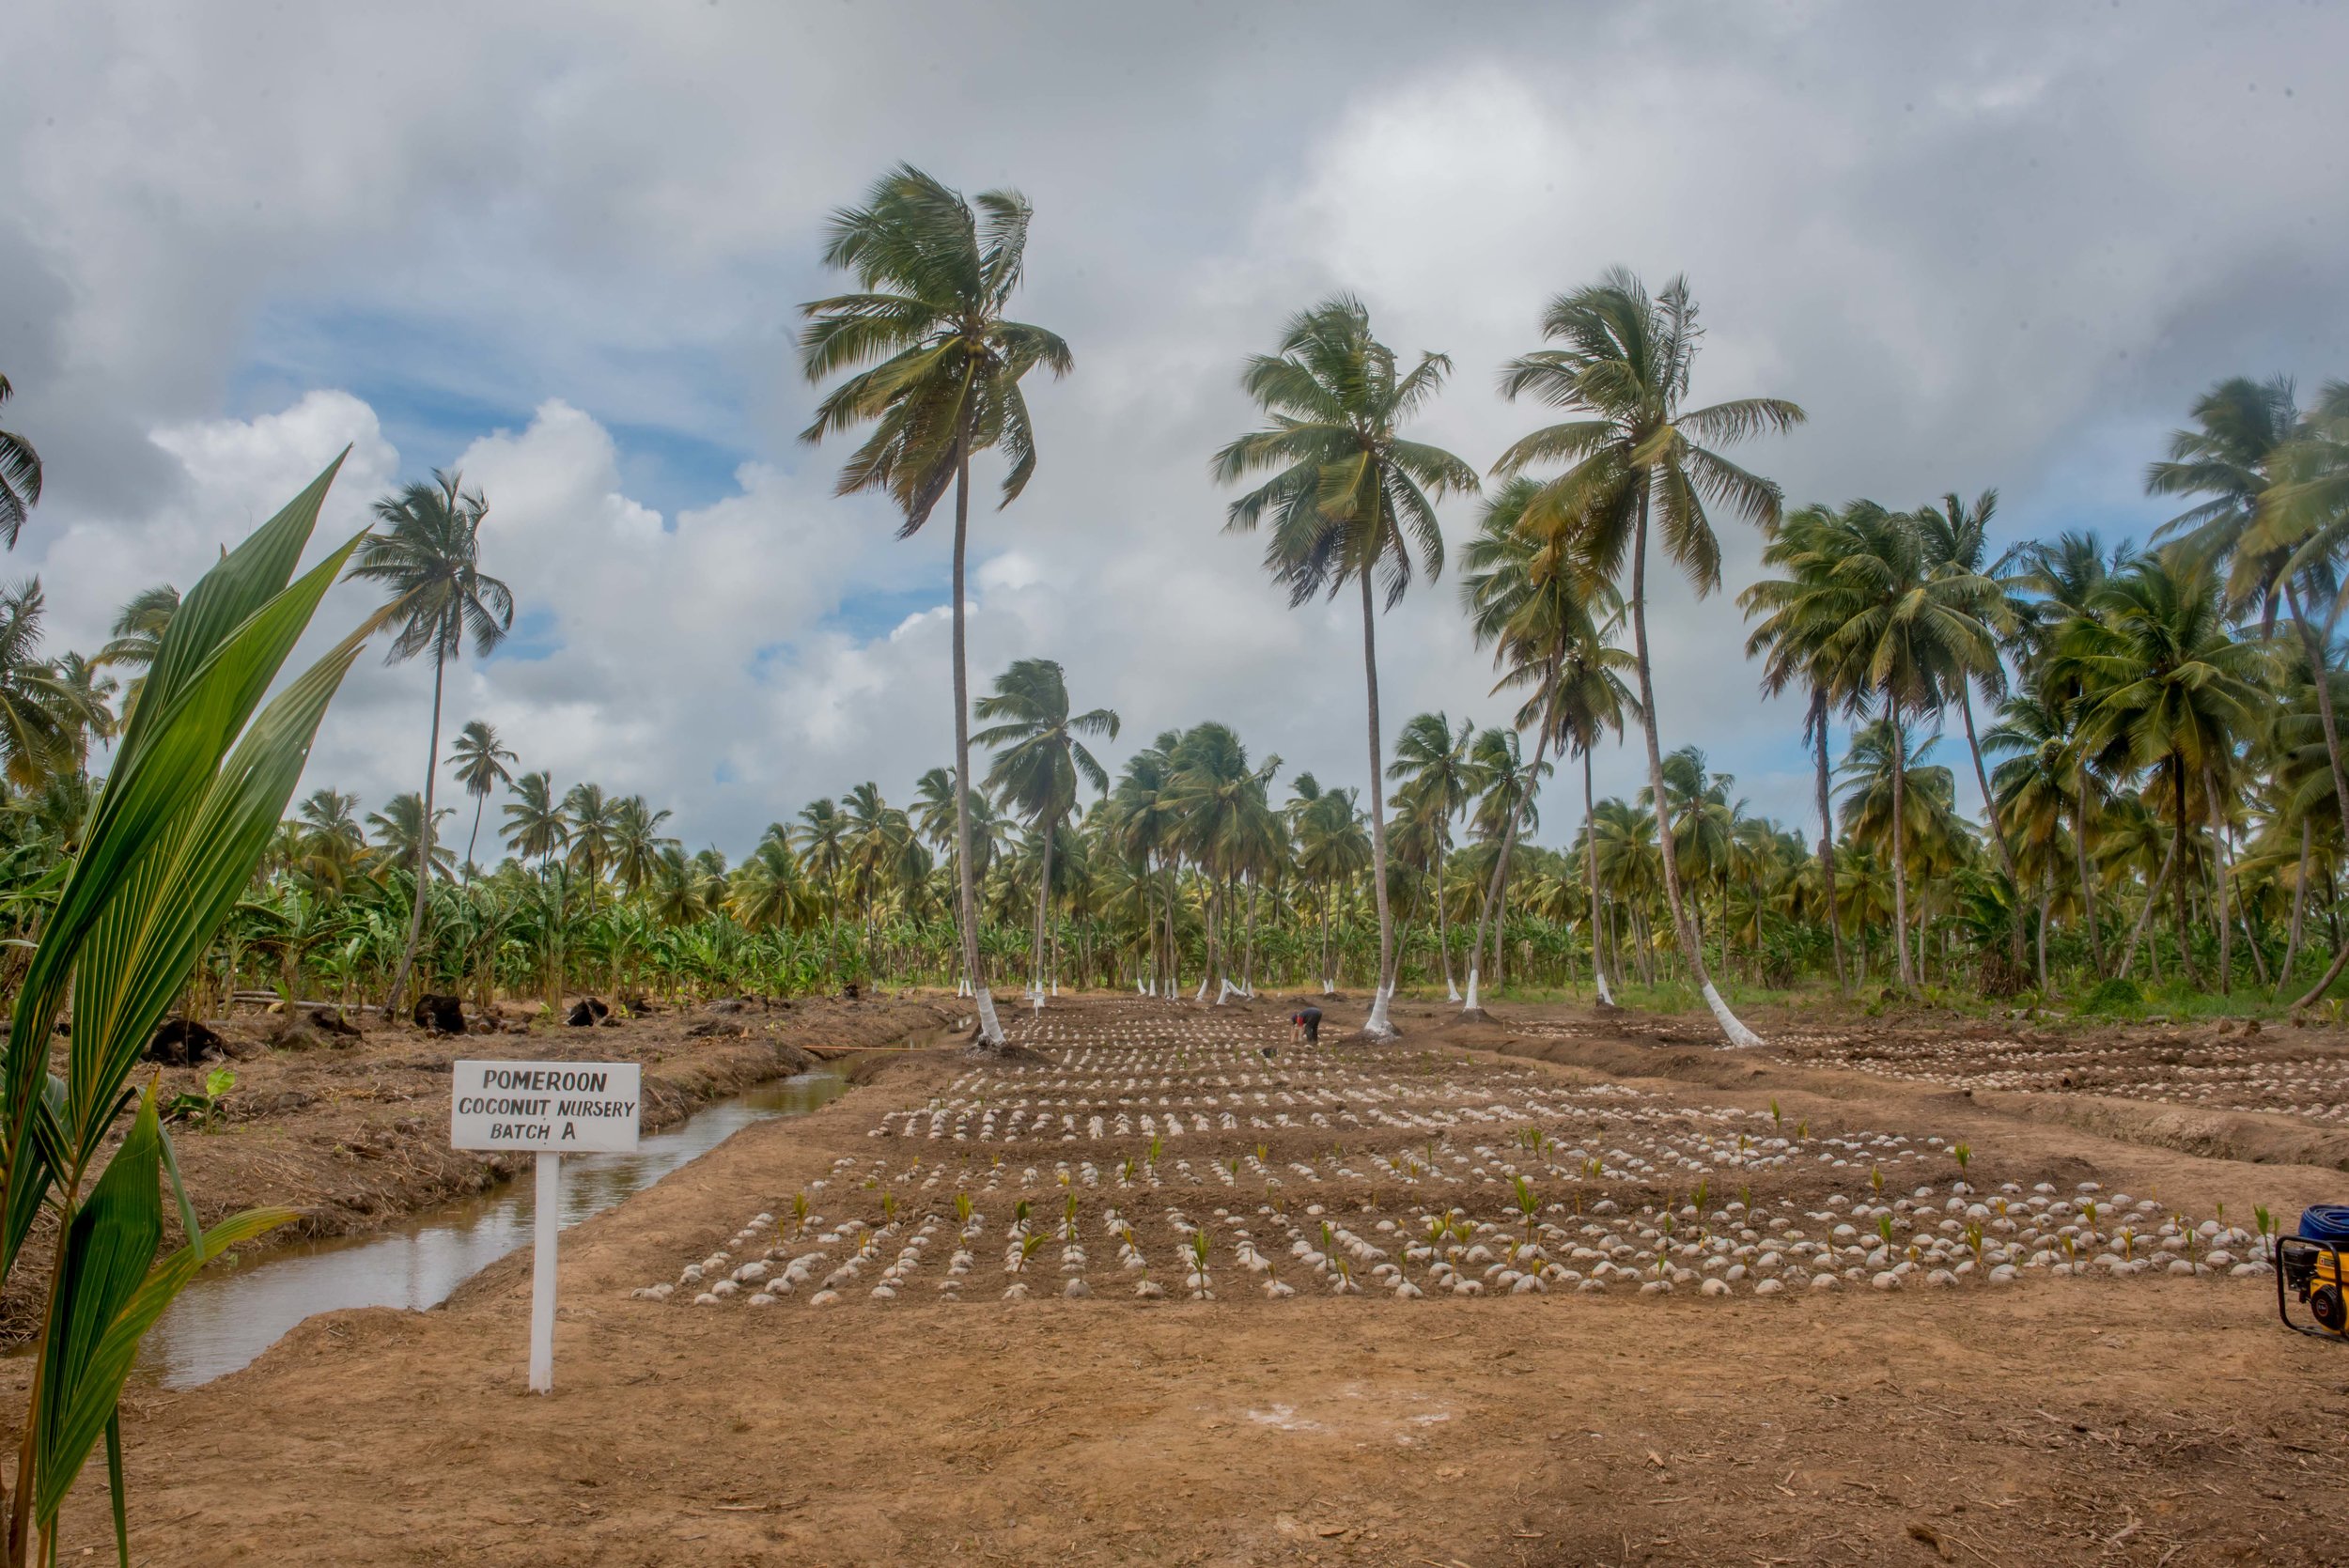 Our coconut seedling nursery transformed from this...